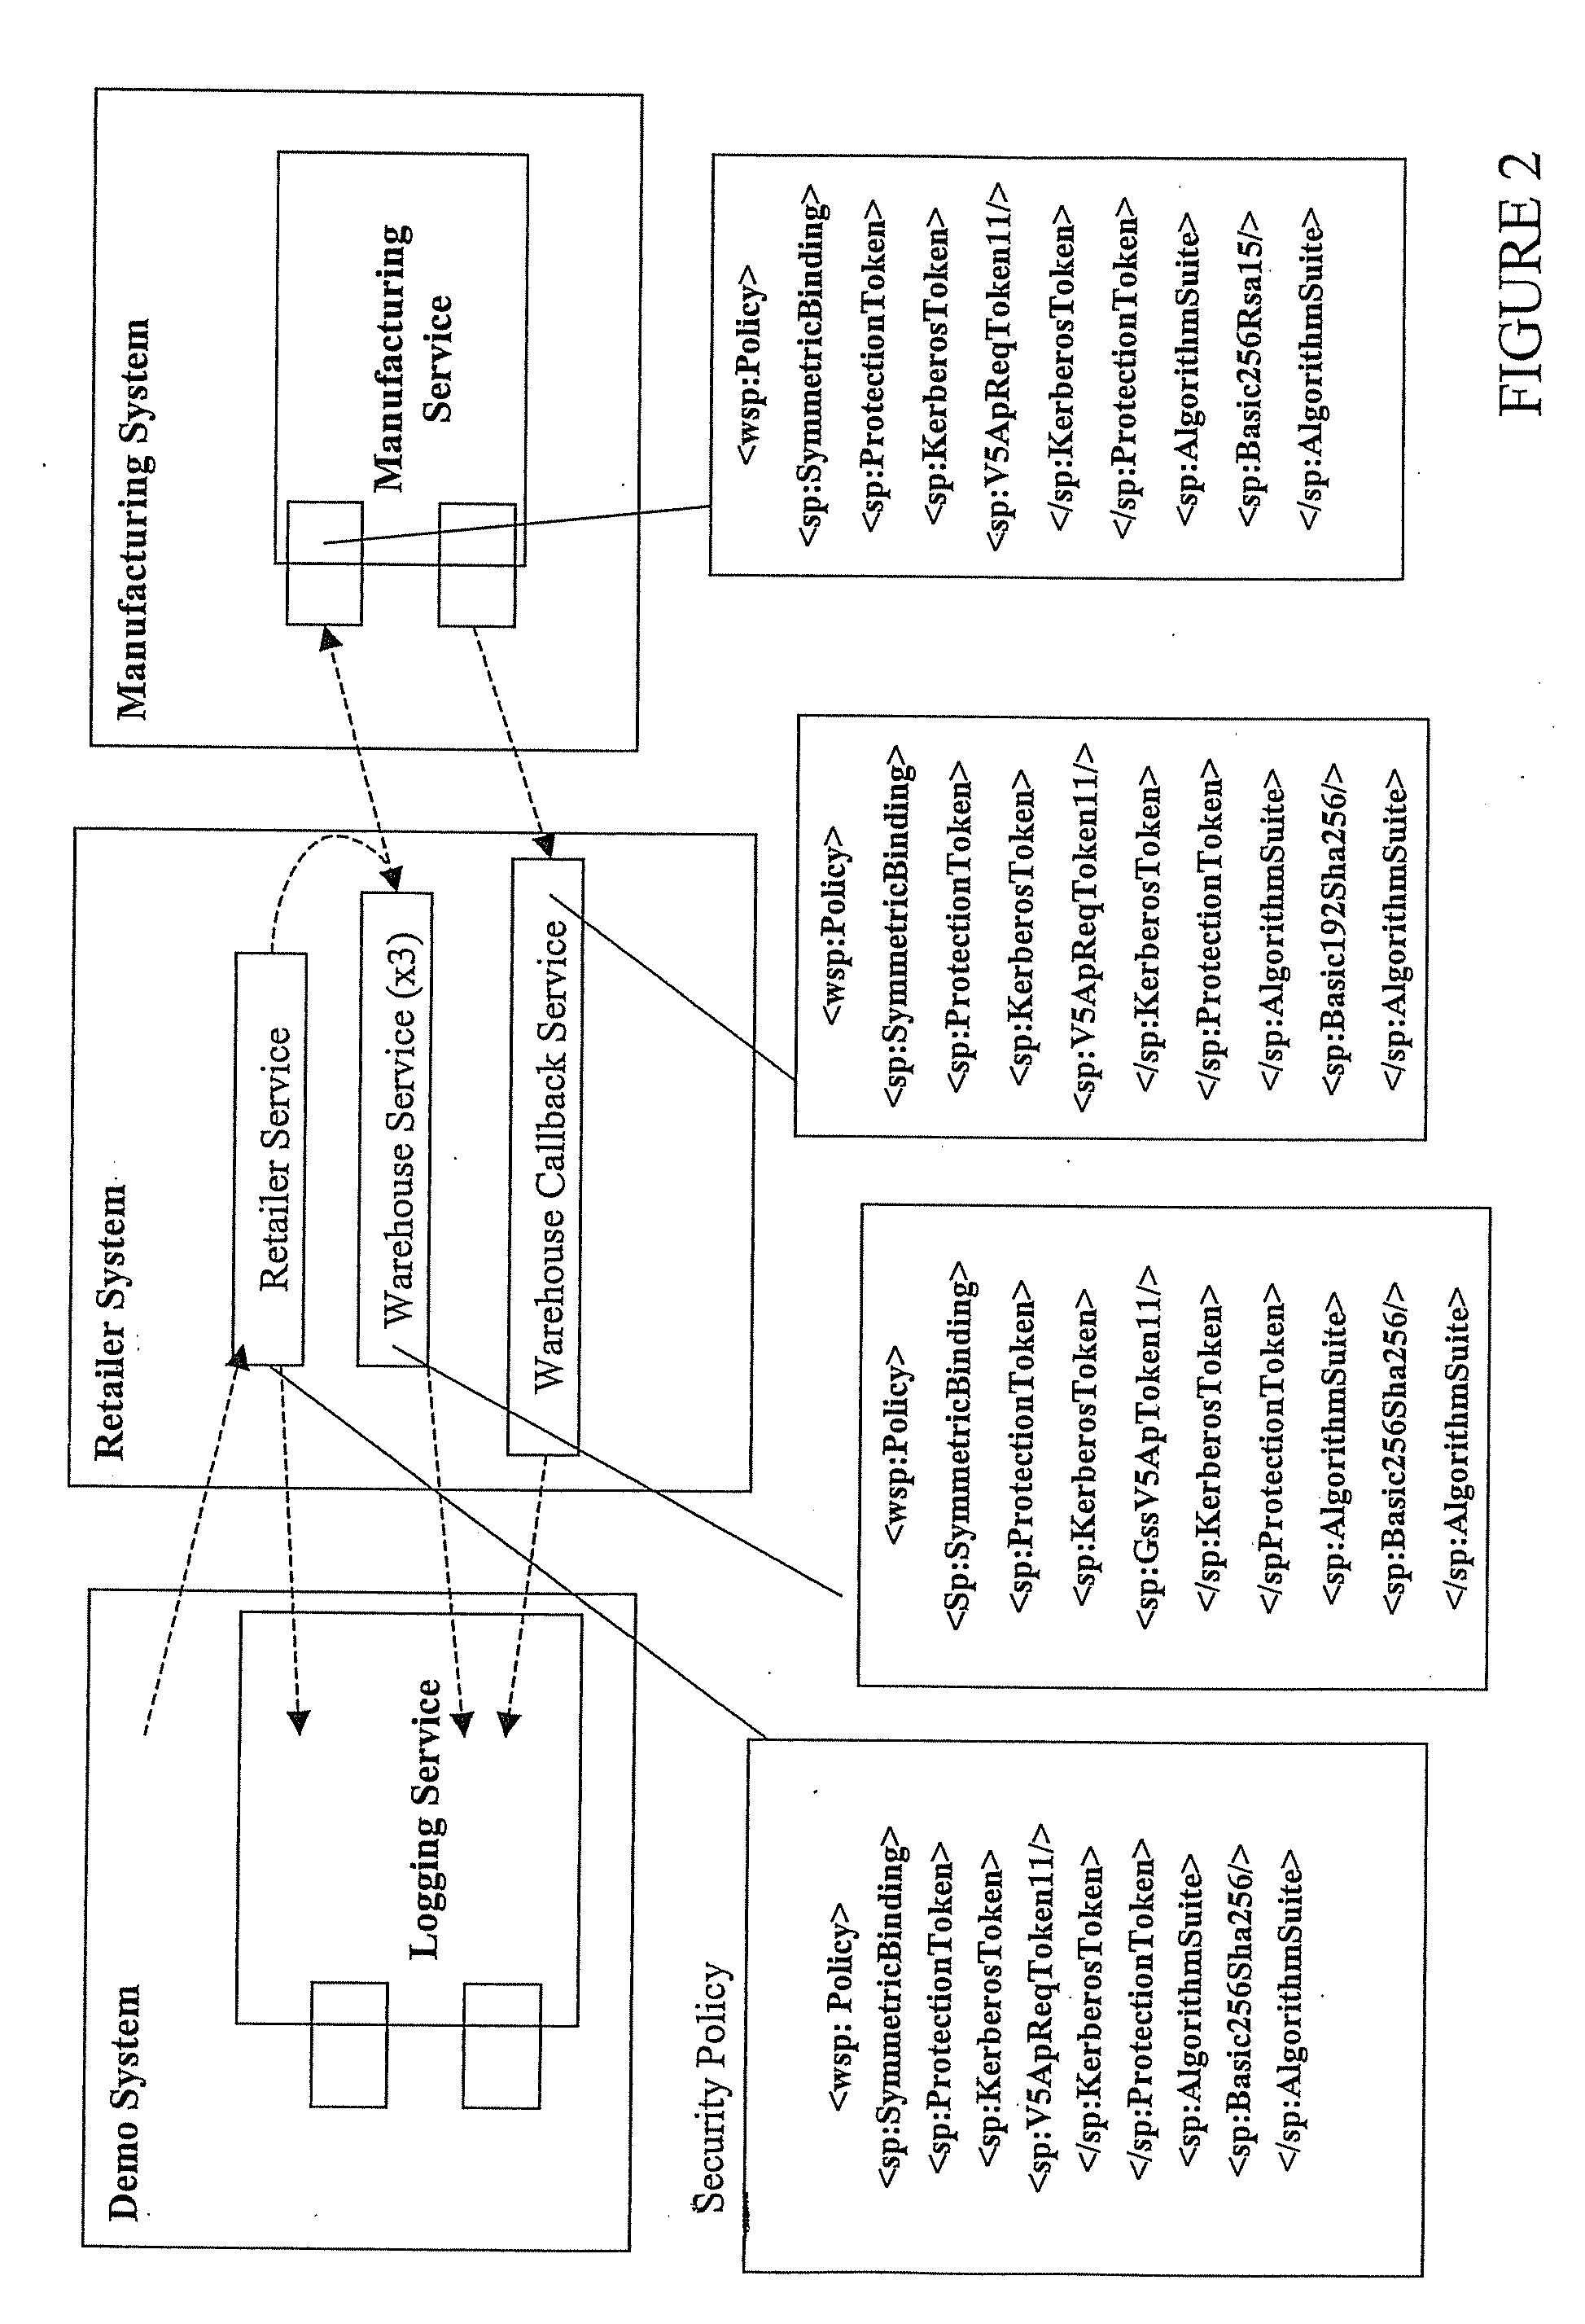 Method for model based verification of security policies for web service composition